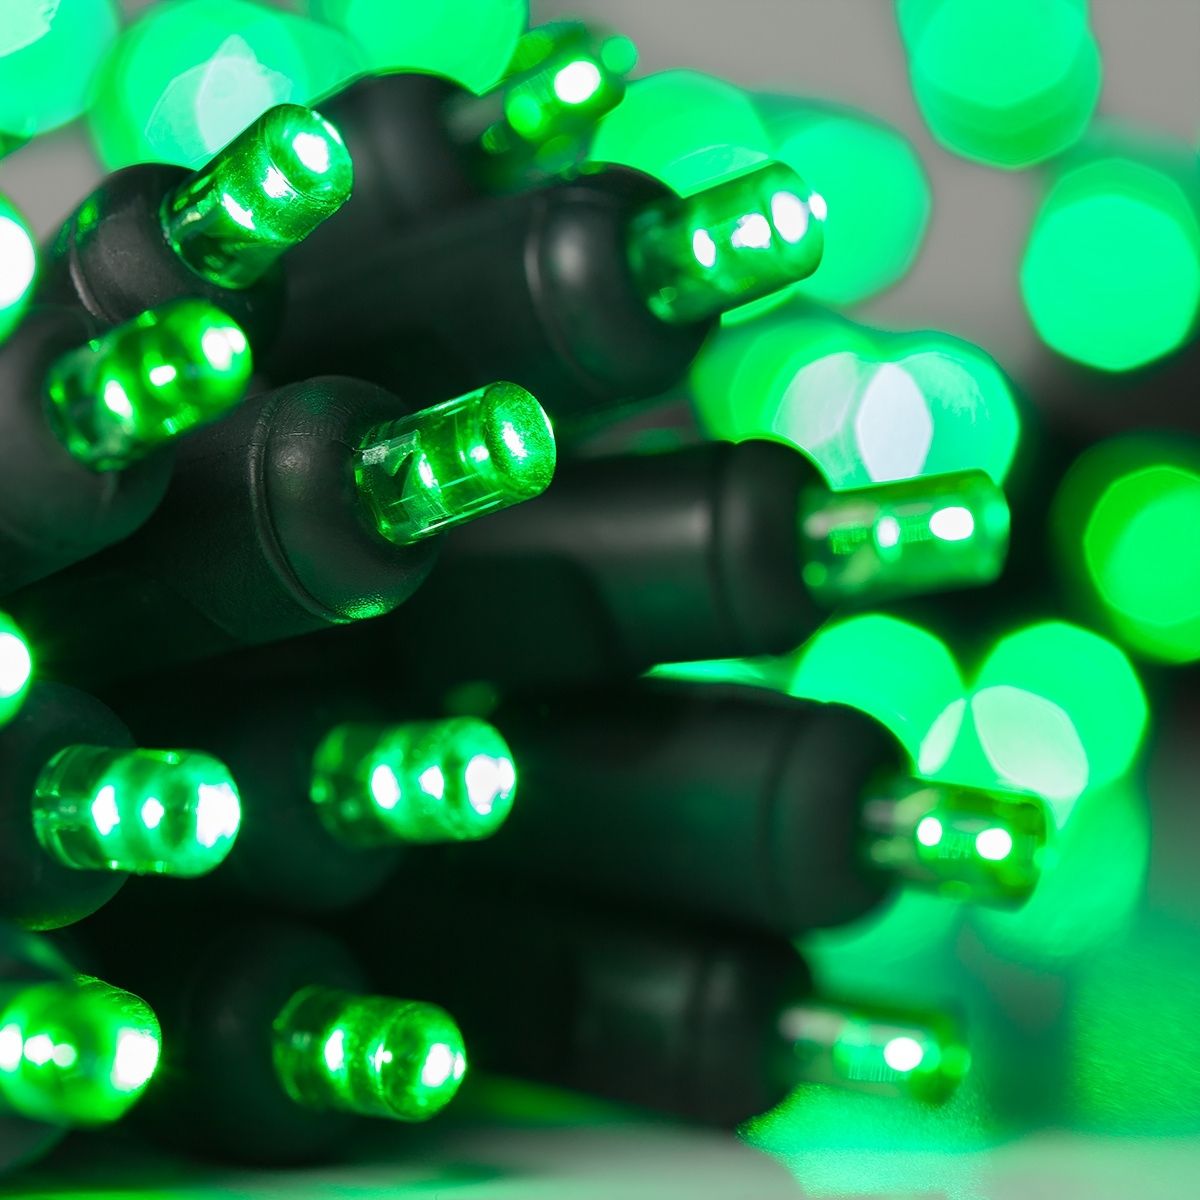 Battery Operated Lights – 20 Green Battery Operated 5mm Led Pertaining To Battery Operated Outdoor Lights At Target (View 14 of 15)